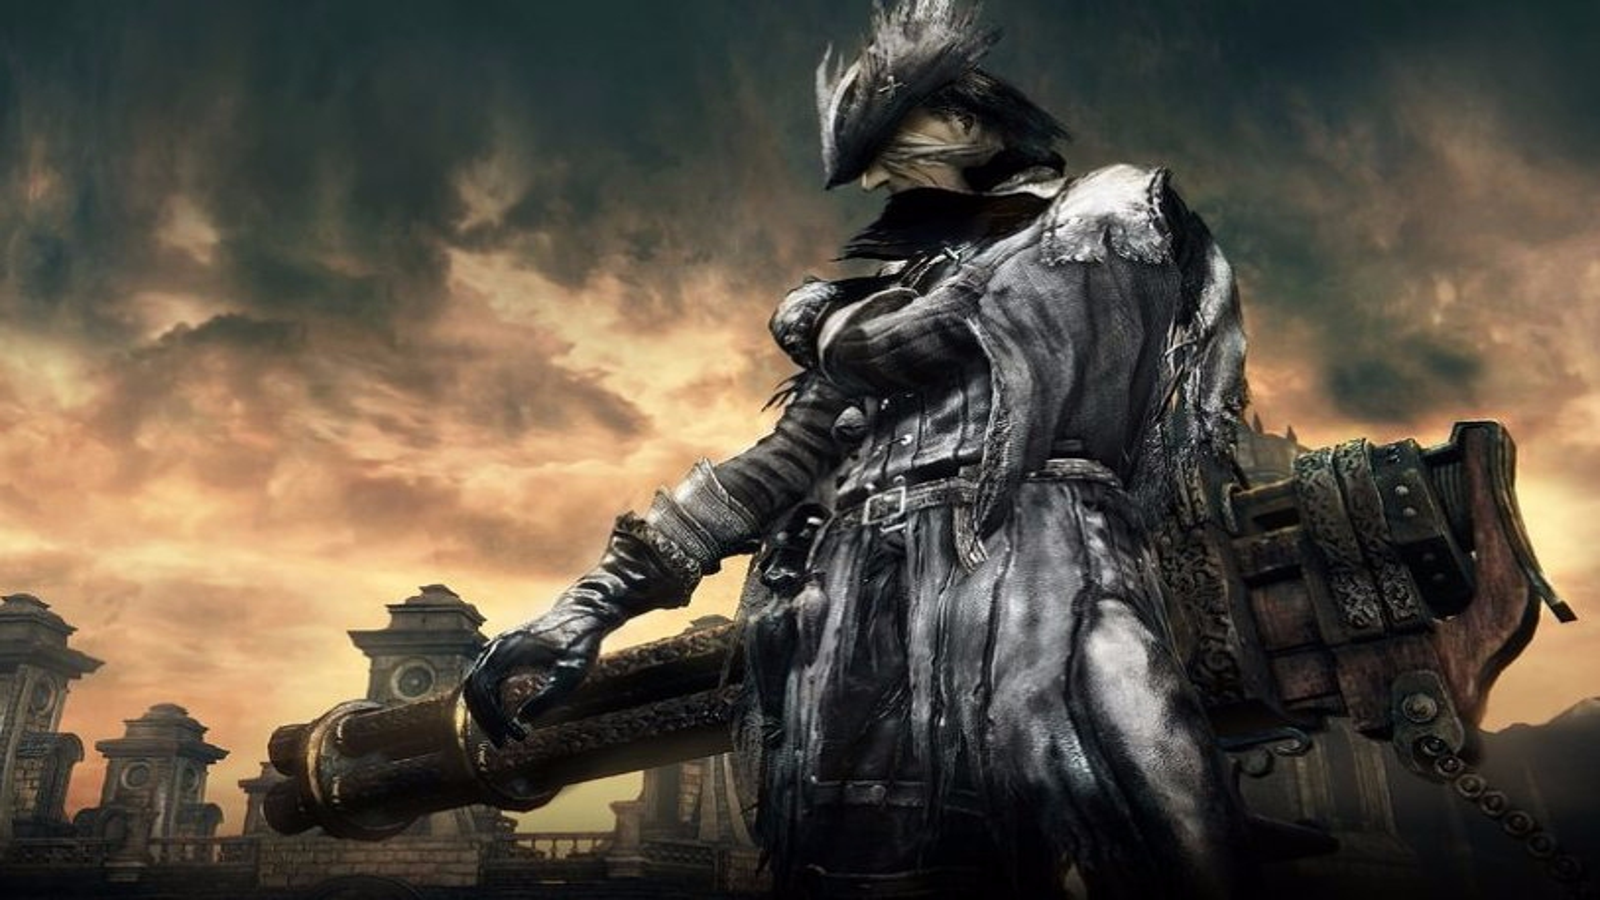 Is Bloodborne the best game ever, or just the second best?